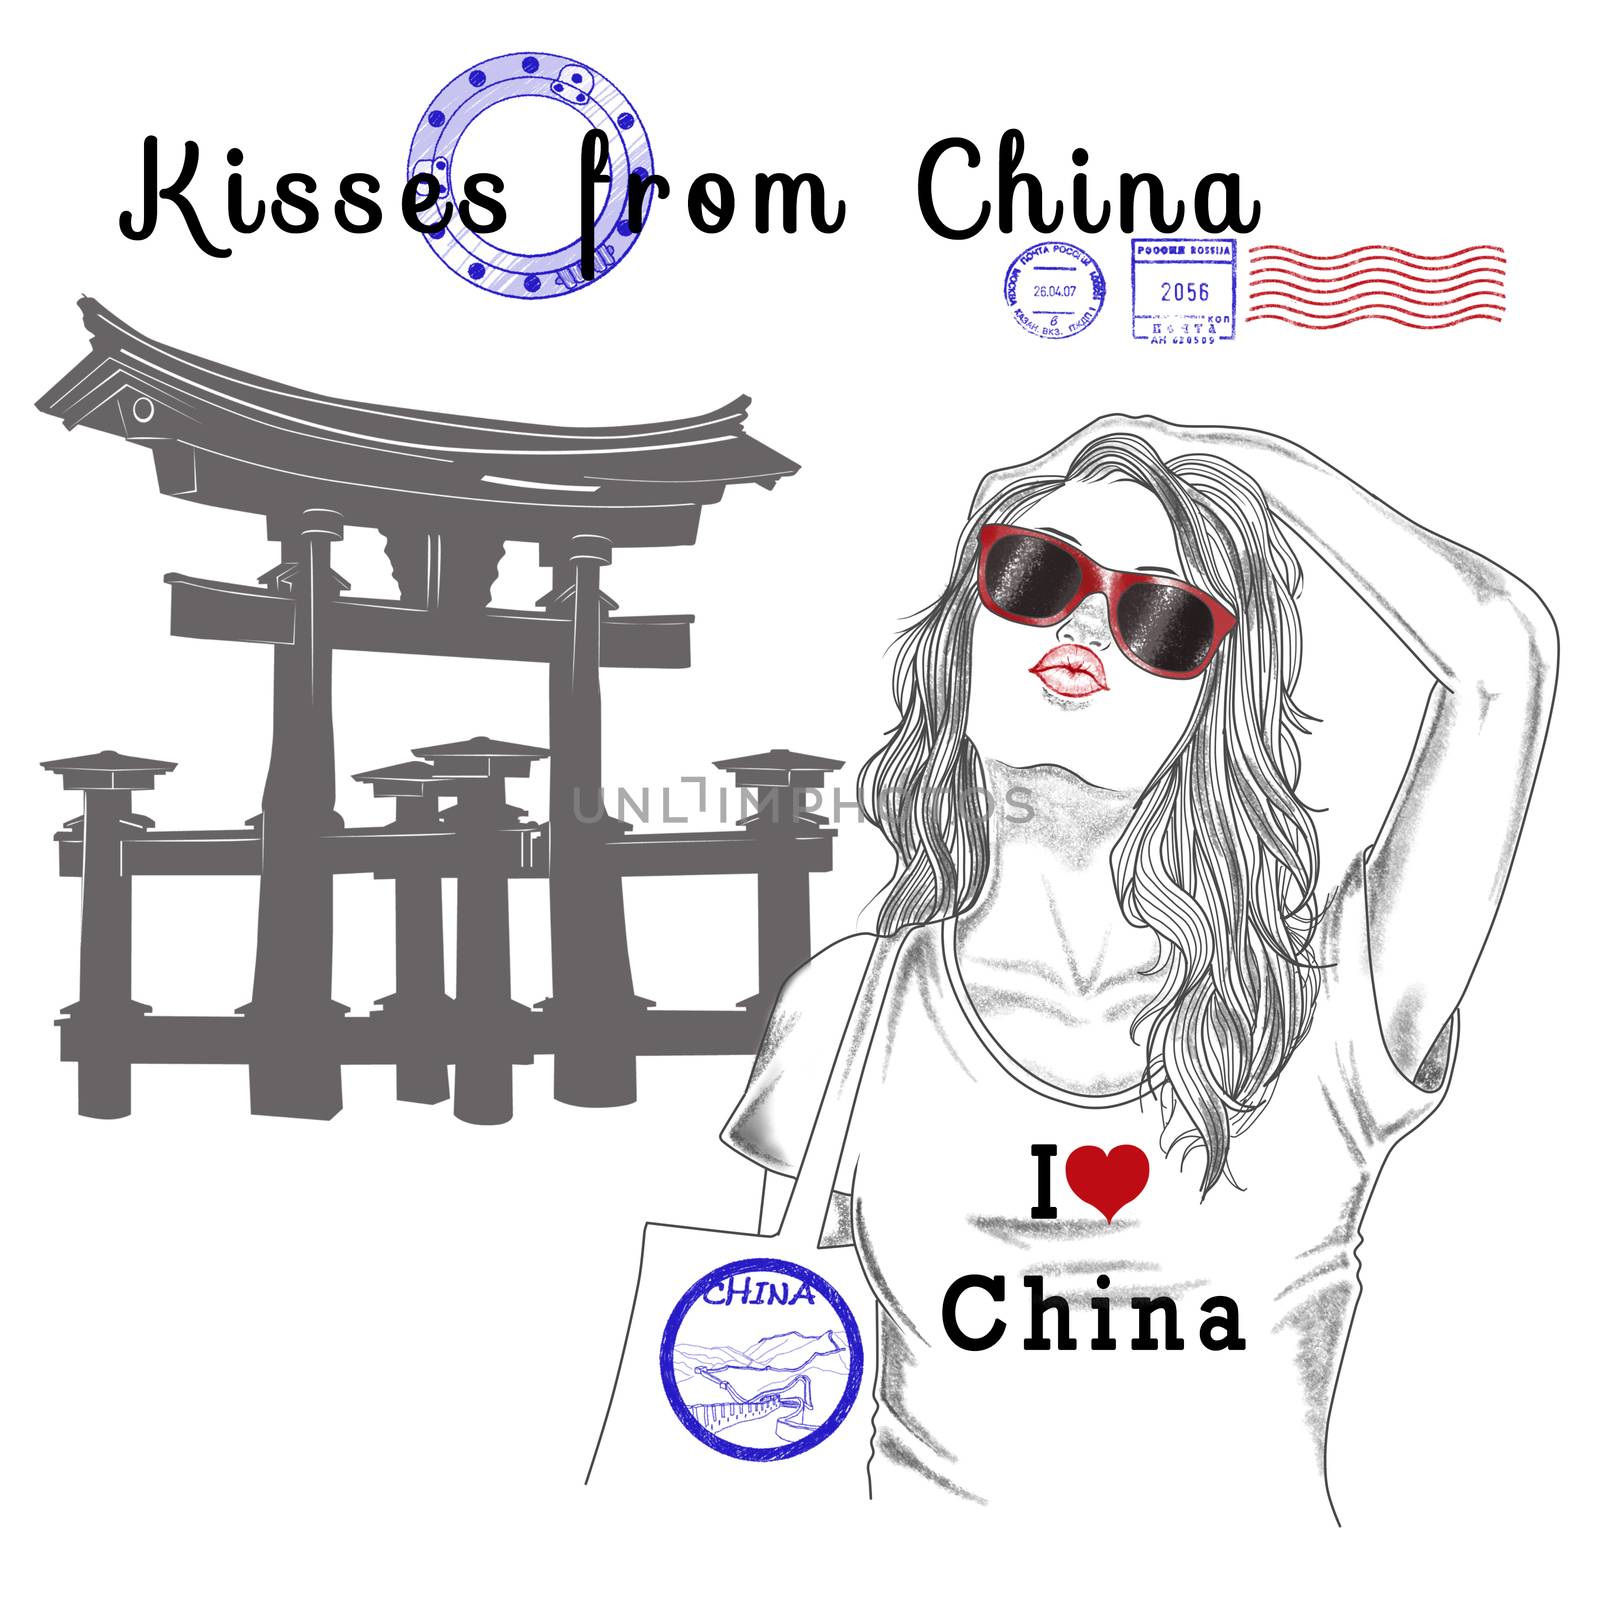 fashion Illustration - Postcard - Girl with monument background and post stamps - Beijing - China - Asia